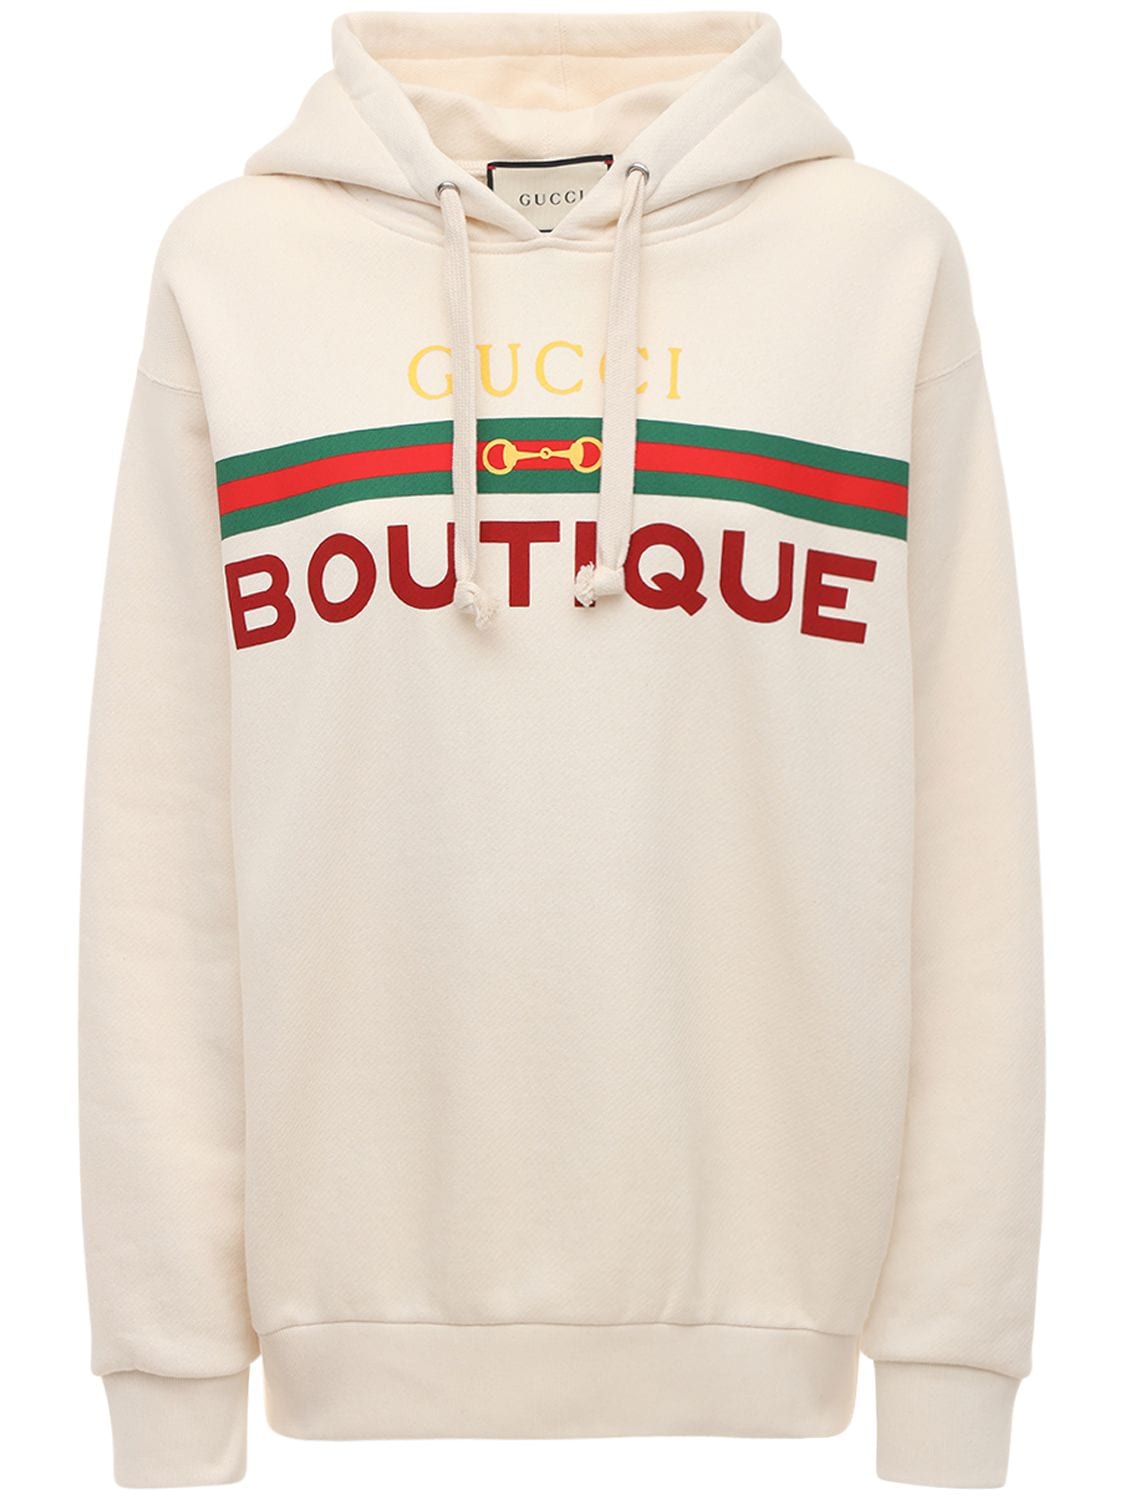 Gucci Boutique Print Cotton Jersey Hoodie In White